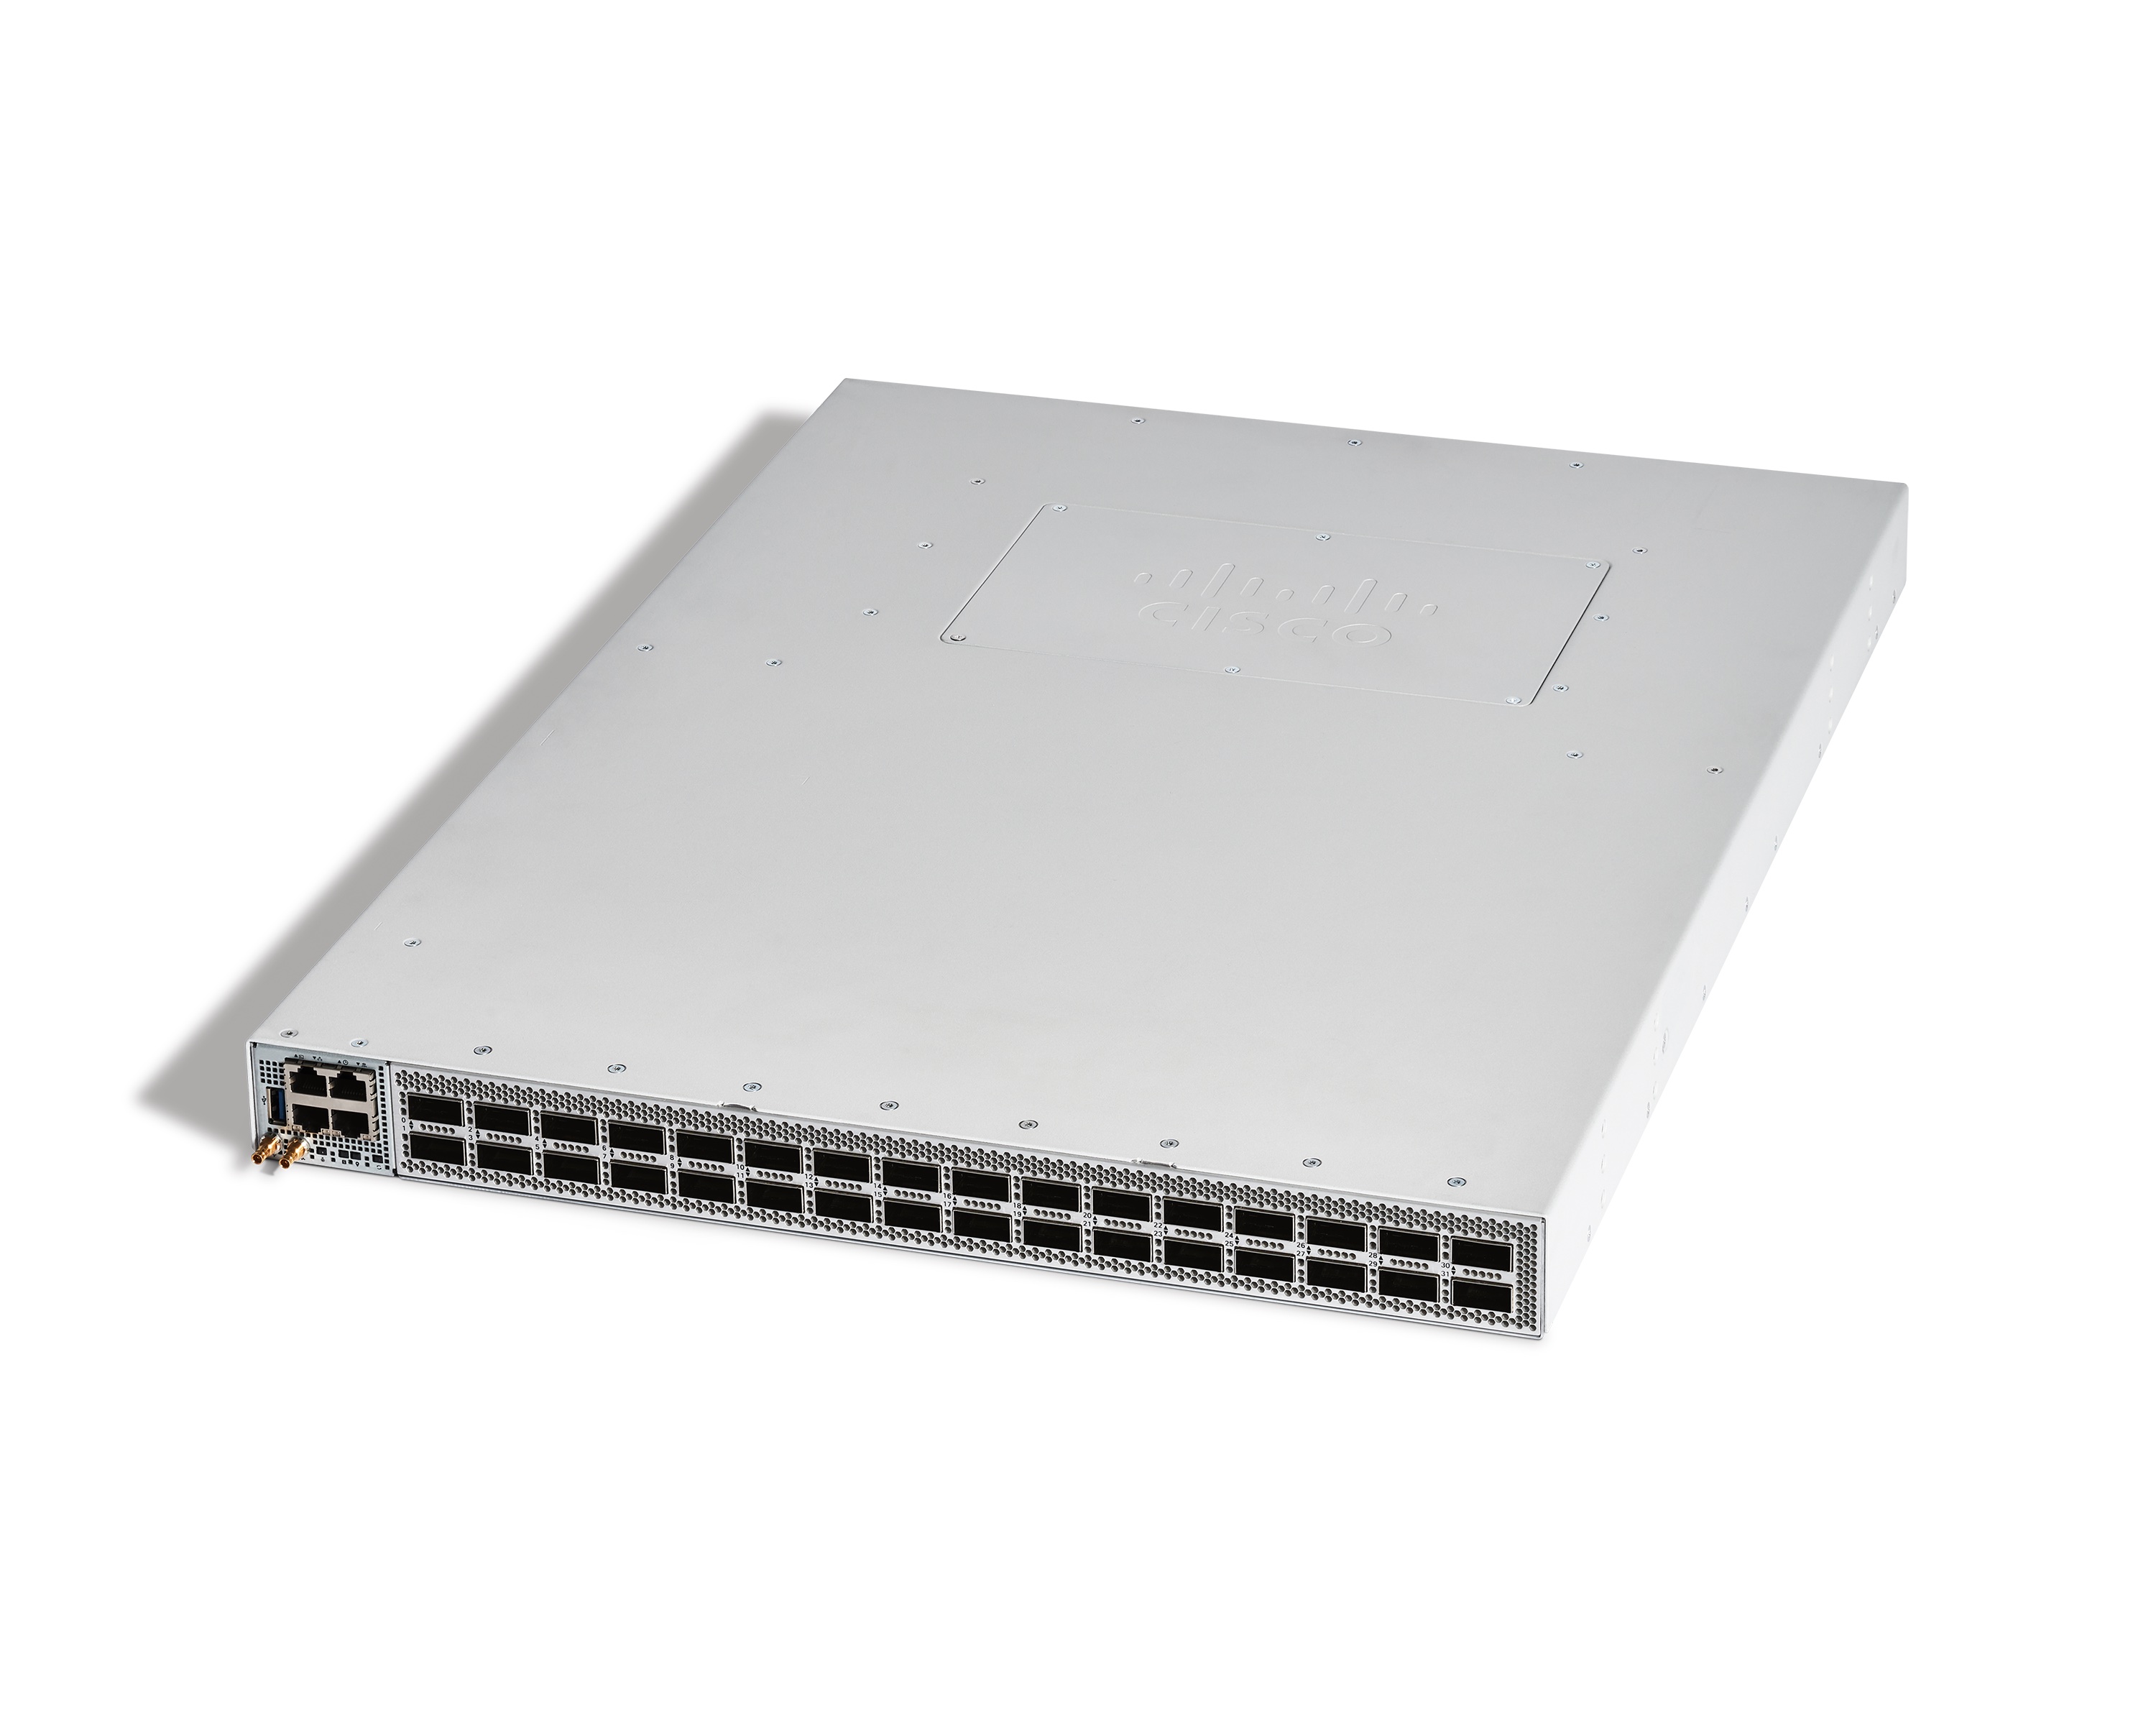 8111-32EH-cisco-8000-series-router-front-right.jpg